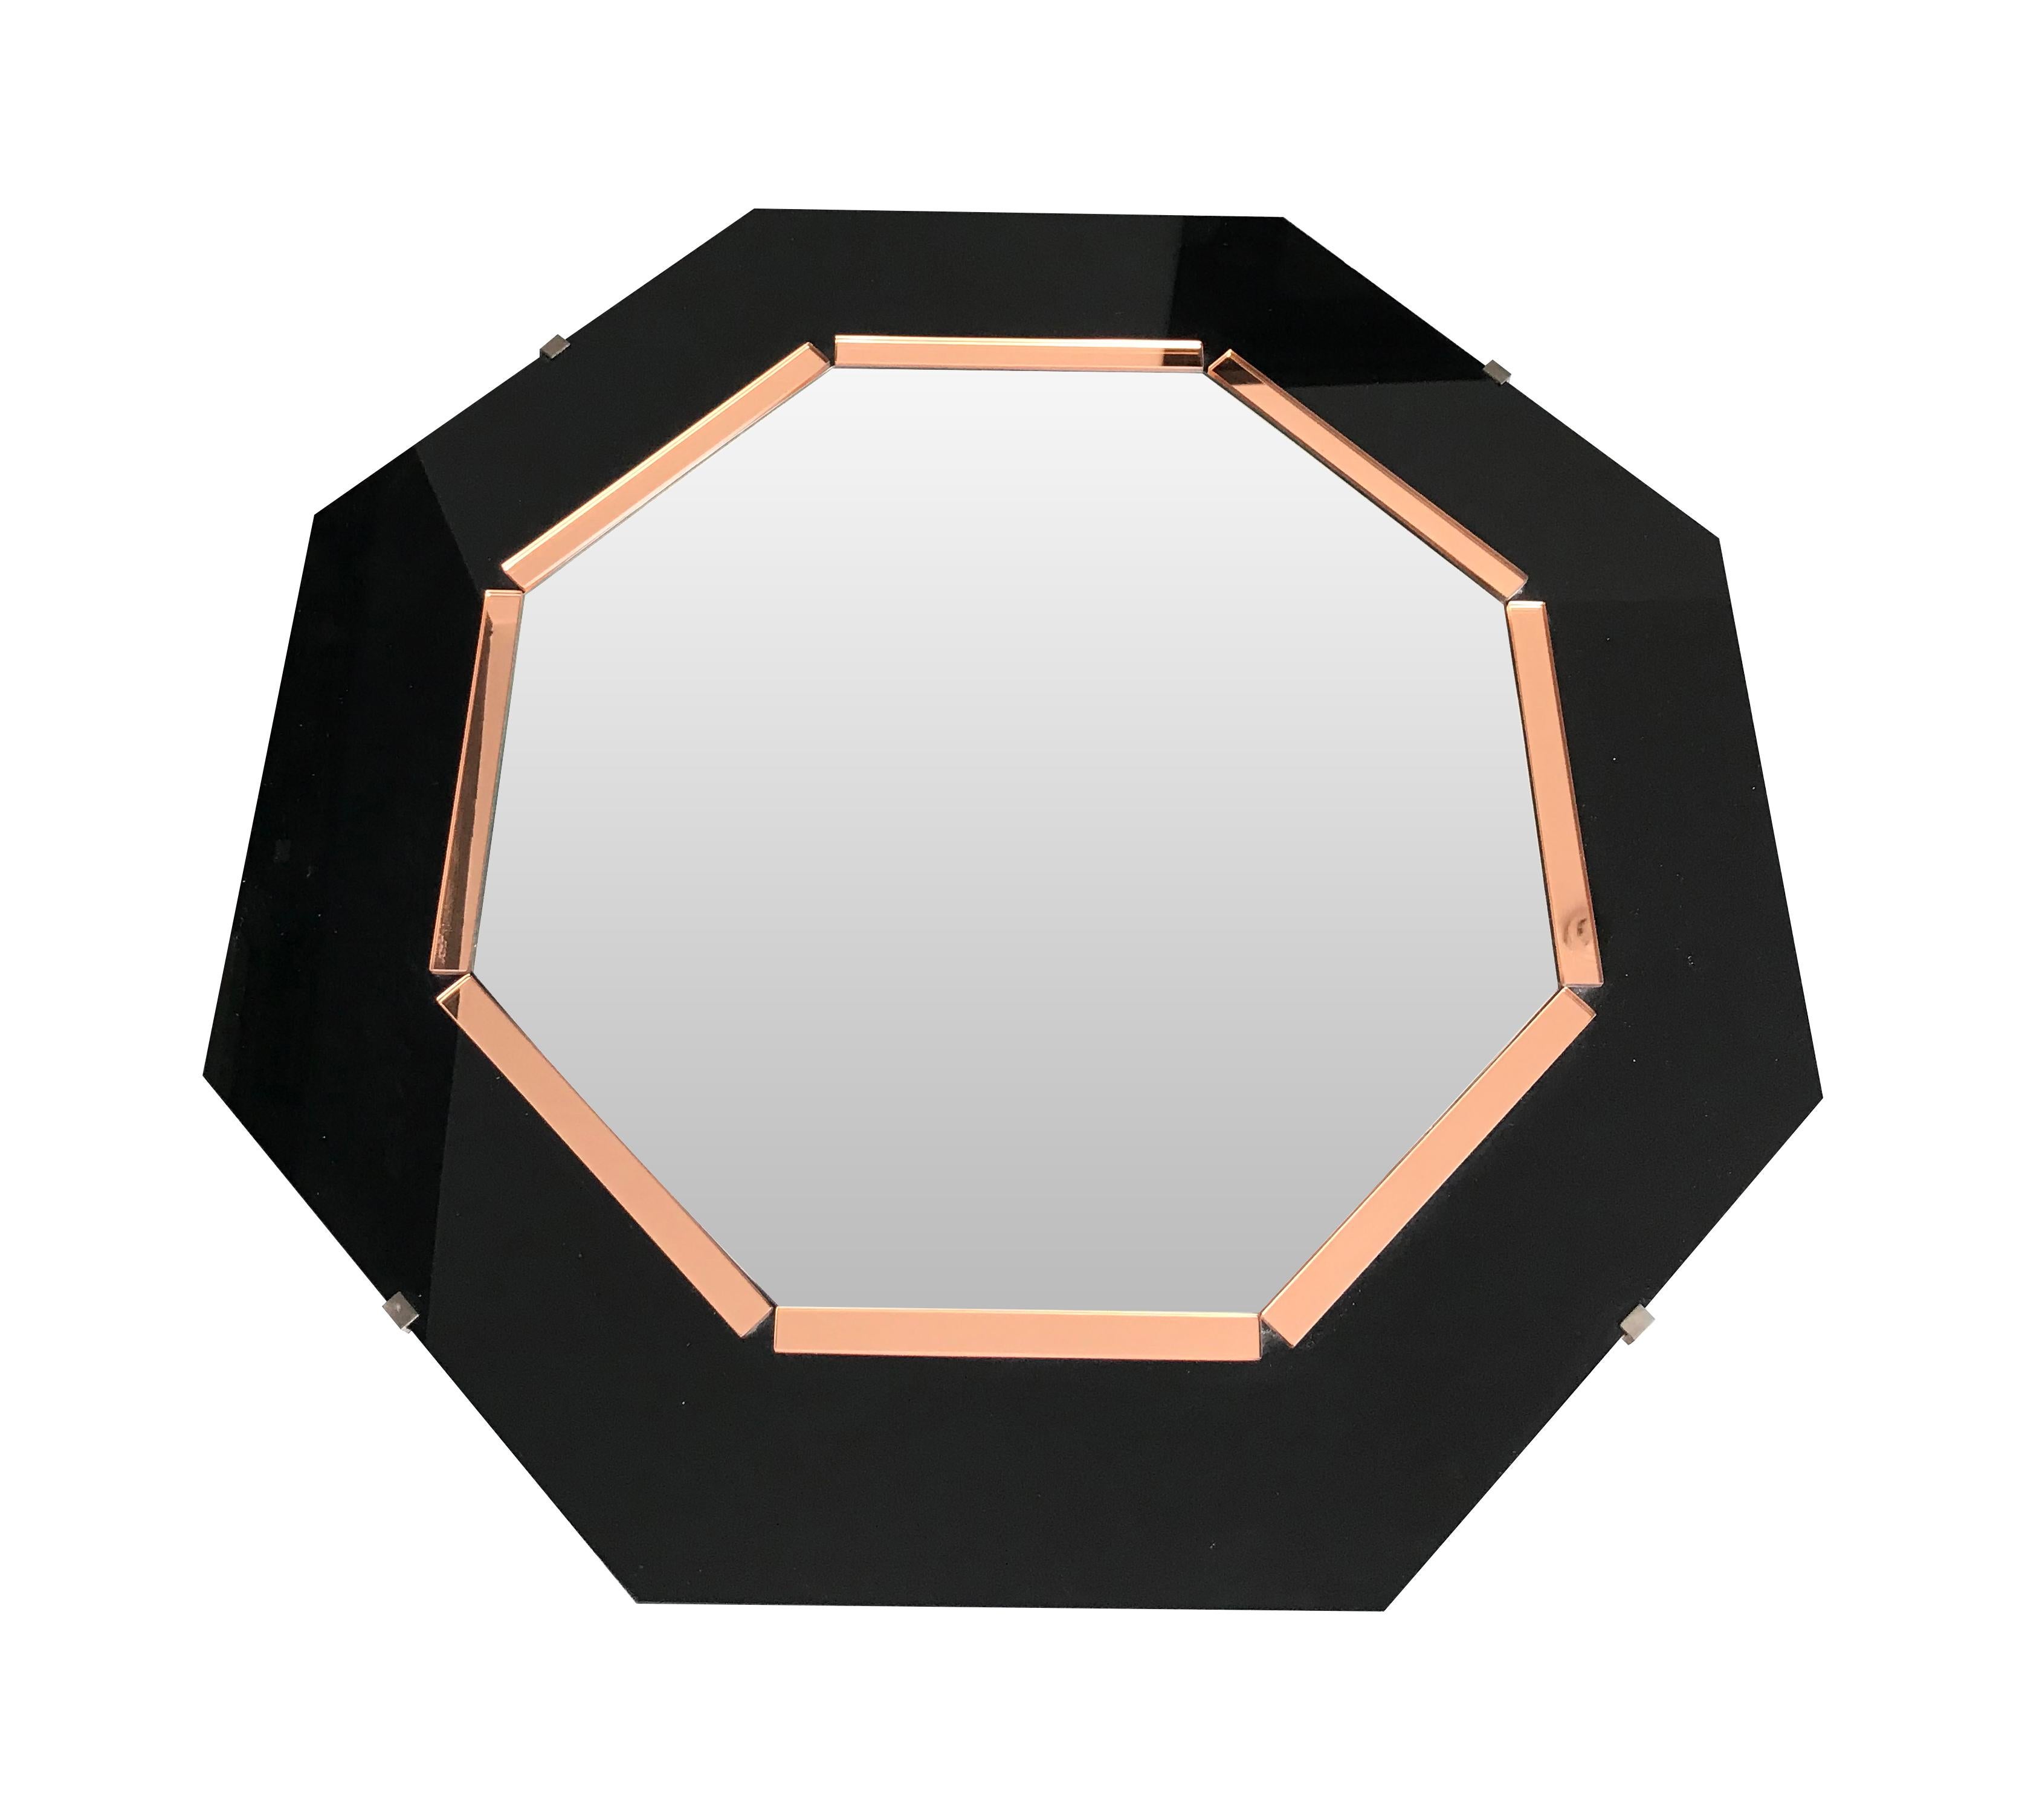 An Art Deco style octagonal mirror with black glass surround and rose mirror interior frame around a bevelled mirror and mounted on board.